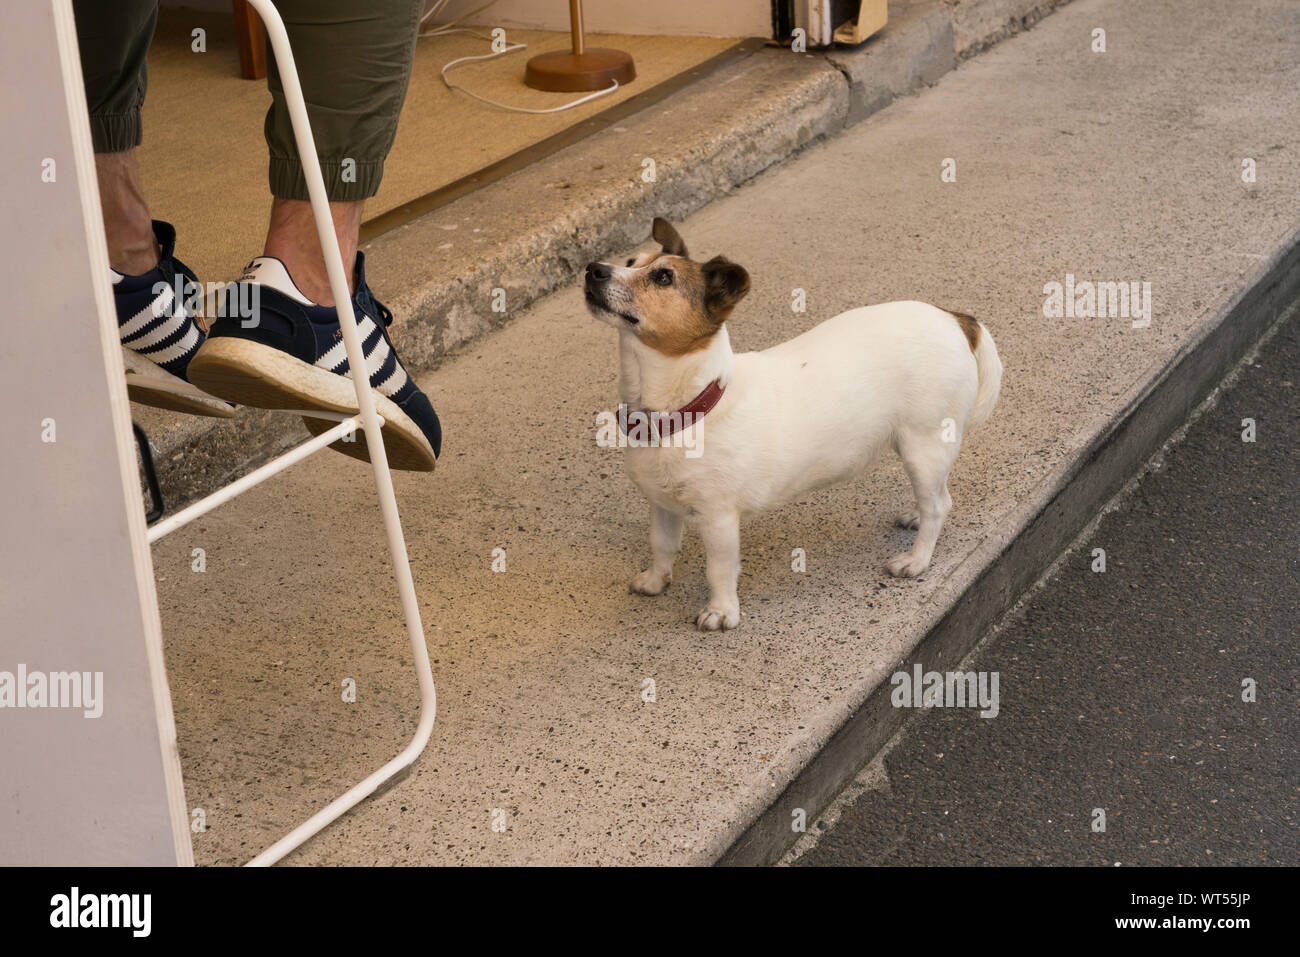 A dog waits for food from its owner at Les Puces de Saint-Ouen flea market Stock Photo